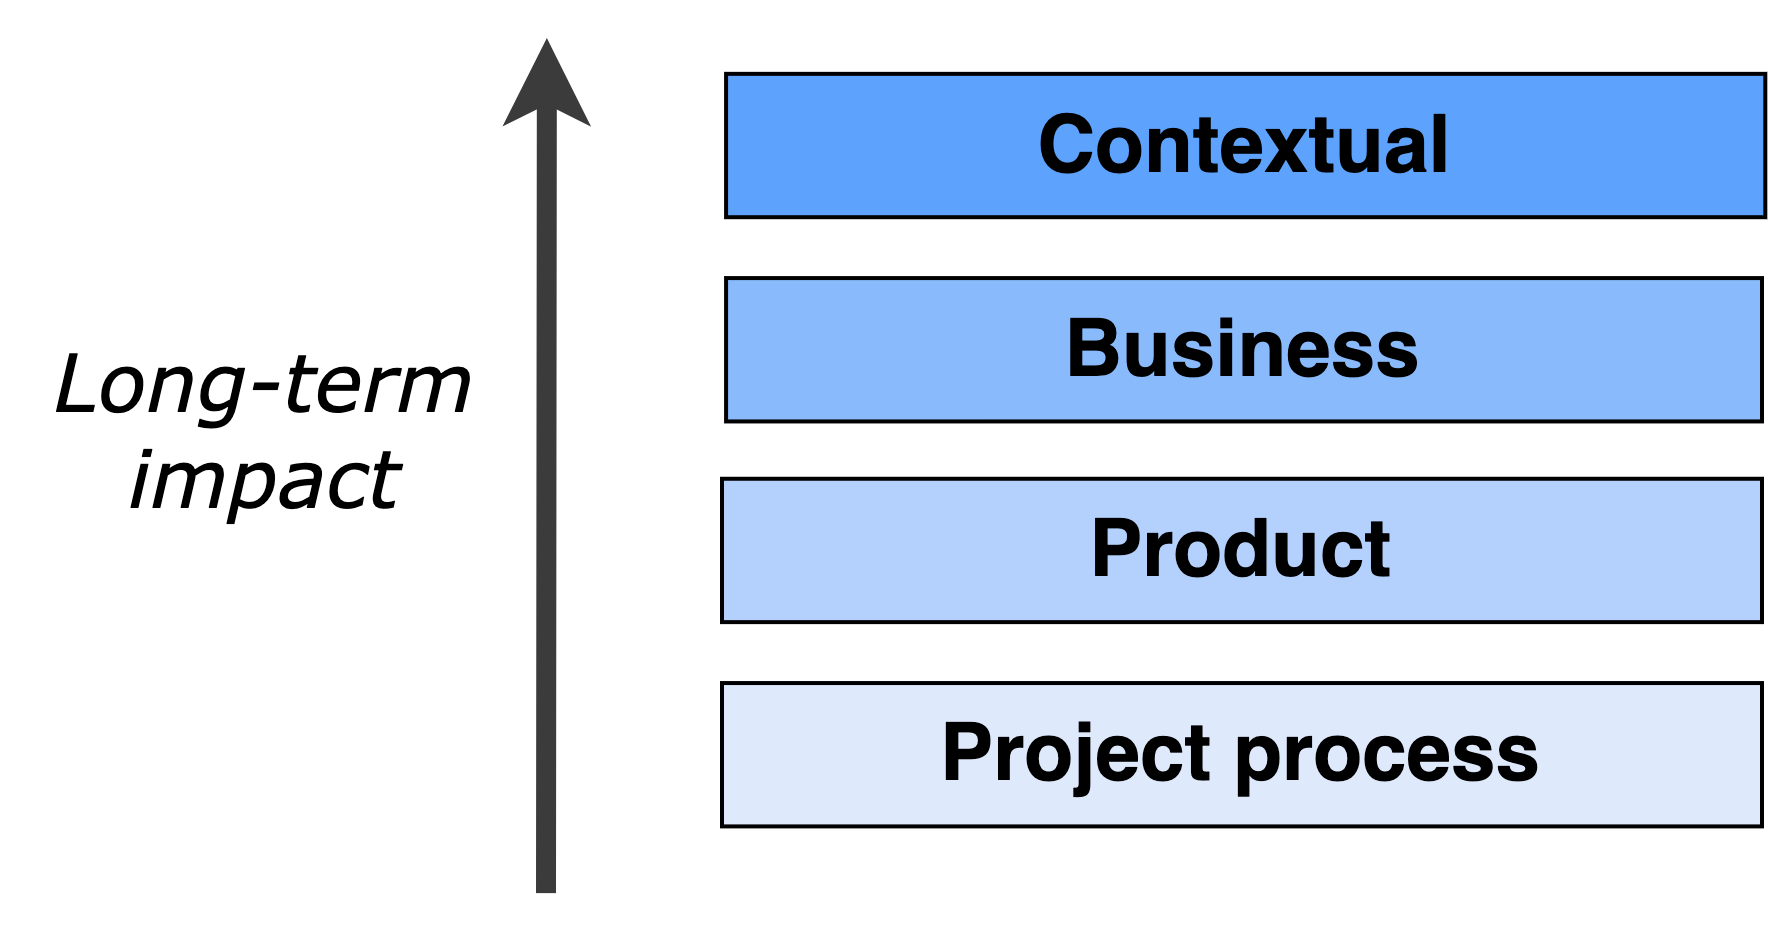 The four levels of project evaluation. We evaluate project outcomes at four levels: project process (relating to the execution of the project), product (relating to the delivered final product), business (related to what value the project brings to the business) and contextual (related to circumstances surrounding the project). The higher levels (contextual, business) are more abstract, but also have more relevance to the business value of the work. We recommend you consider all of these when defining, and evaluating, a project. (Adapted from Eskander Howsawi and colleagues.)